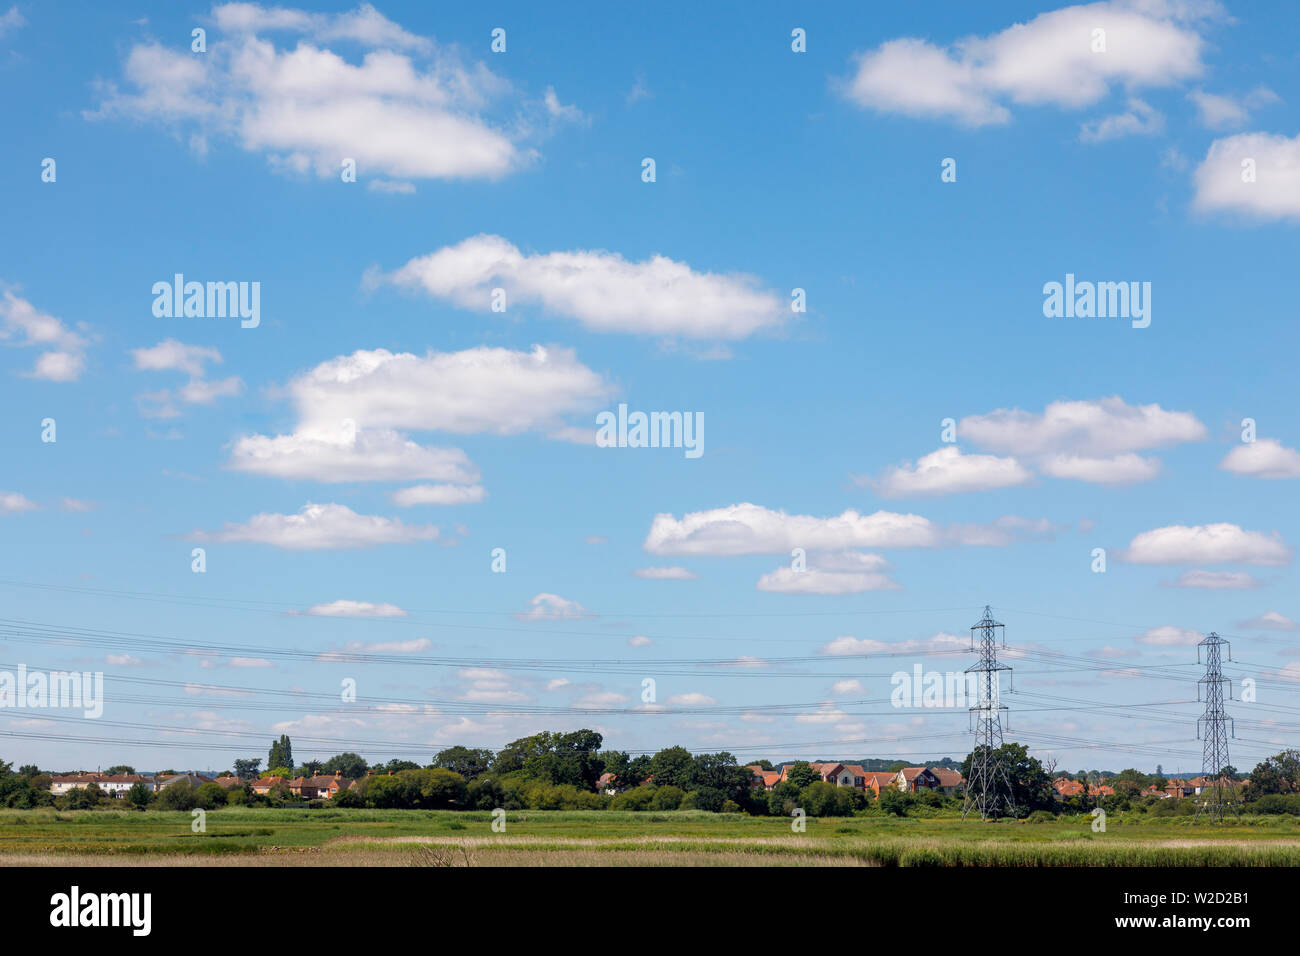 View over reed beds of the River Test estuary at Redbridge as it enters Southampton Water looking towards Totton with electricity pylons and lines Stock Photo